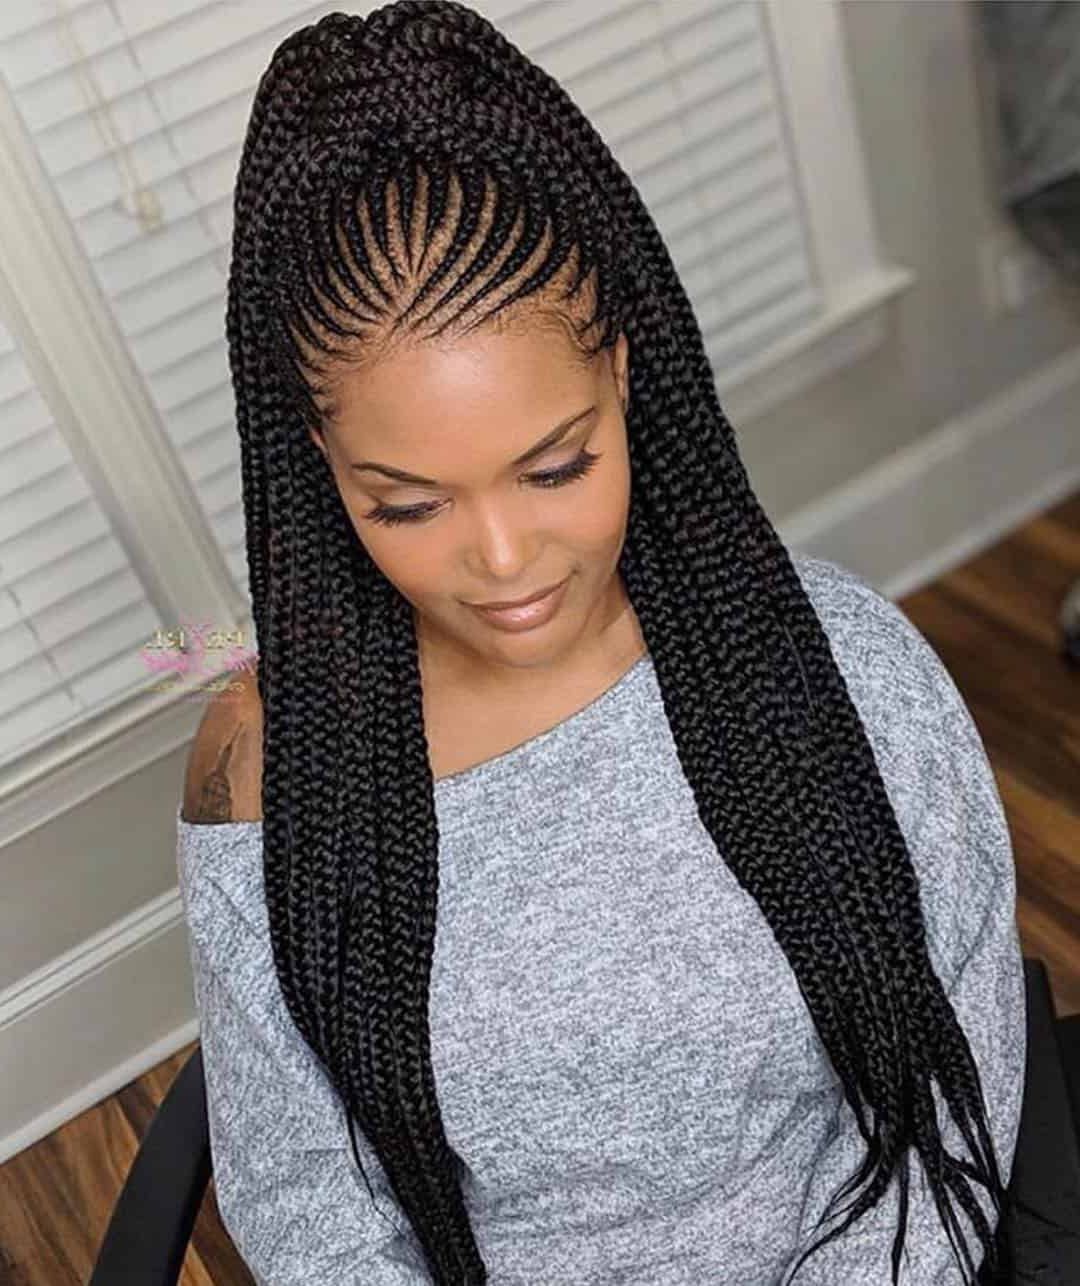 27 Lovely Lemonade Braids To Refresh Your Look – Wild About With Regard To Most Popular Diamond Goddess Lemonade Braided Hairstyles (View 16 of 20)